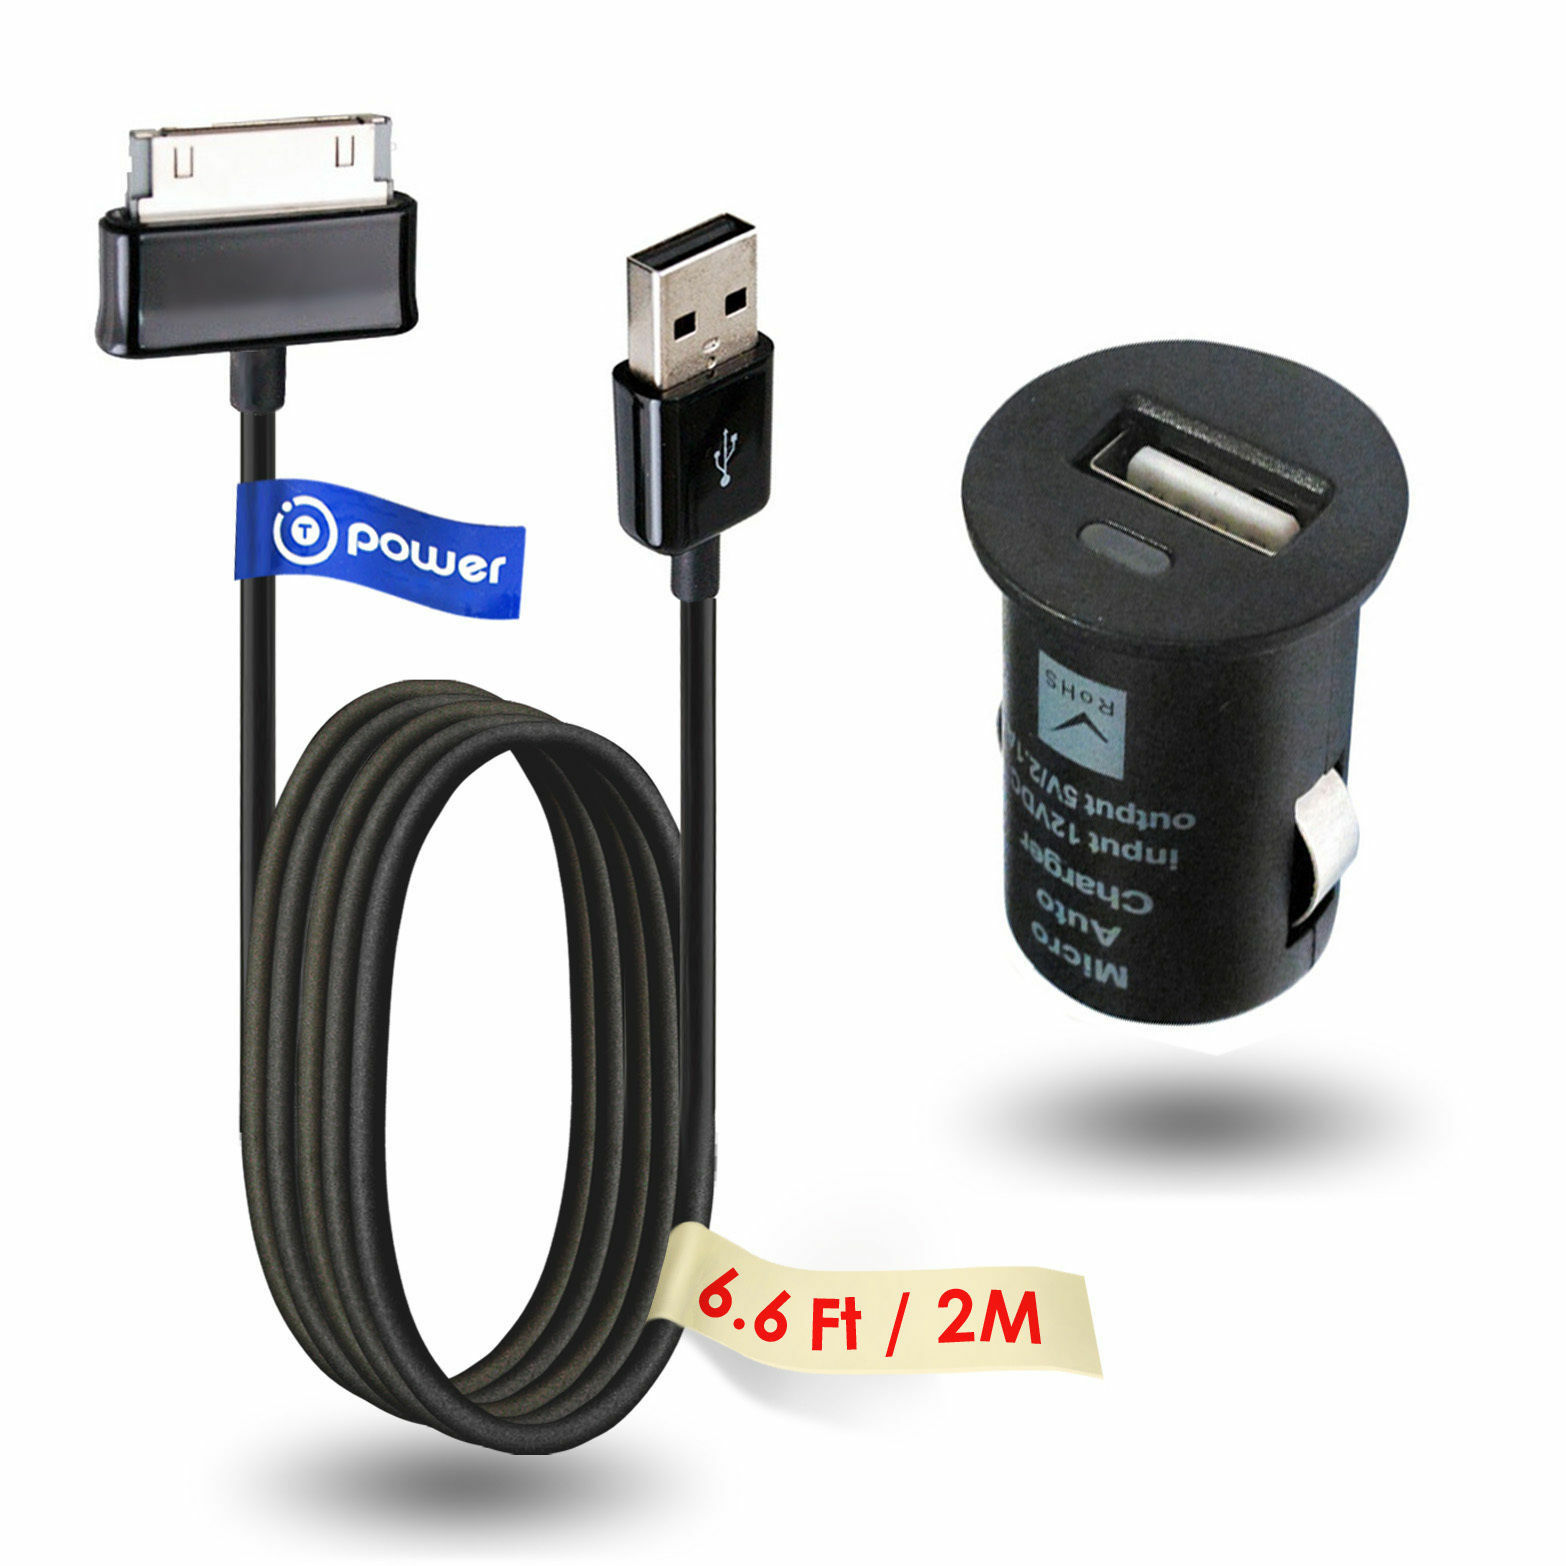 CAR USB USB Ac Adapter Charger for Samsung Galaxy Tab Tablet 7 10.1 Power Supply 1 pc x DC 5V 2A USB Car/Auto Charger (